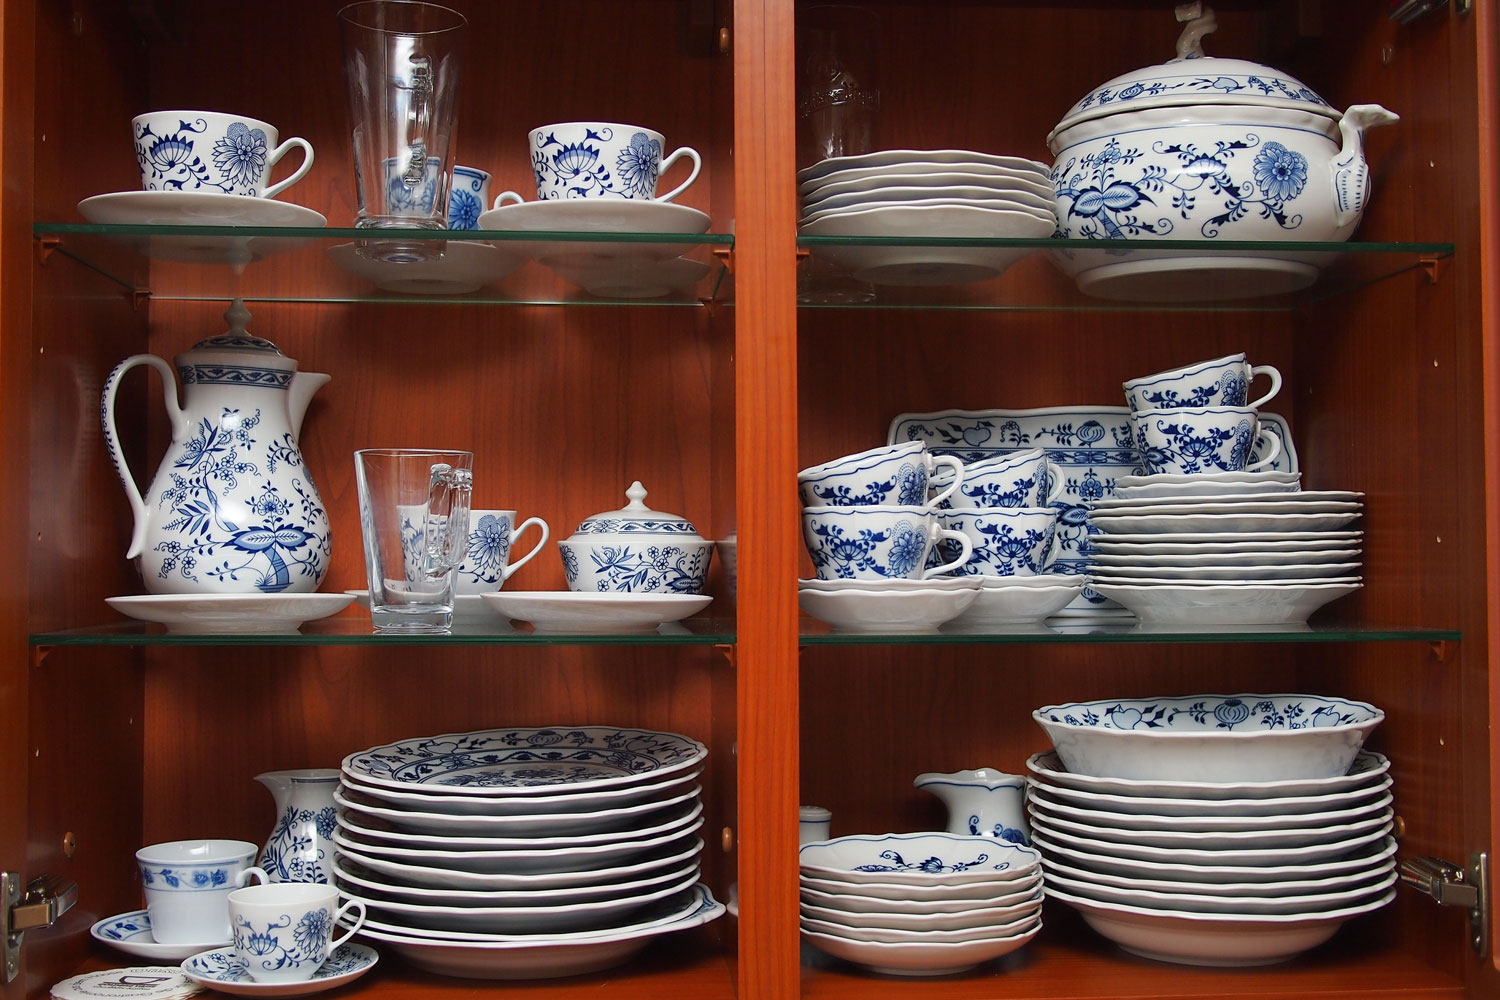 Gorgeous Chinas at a China Cabinet